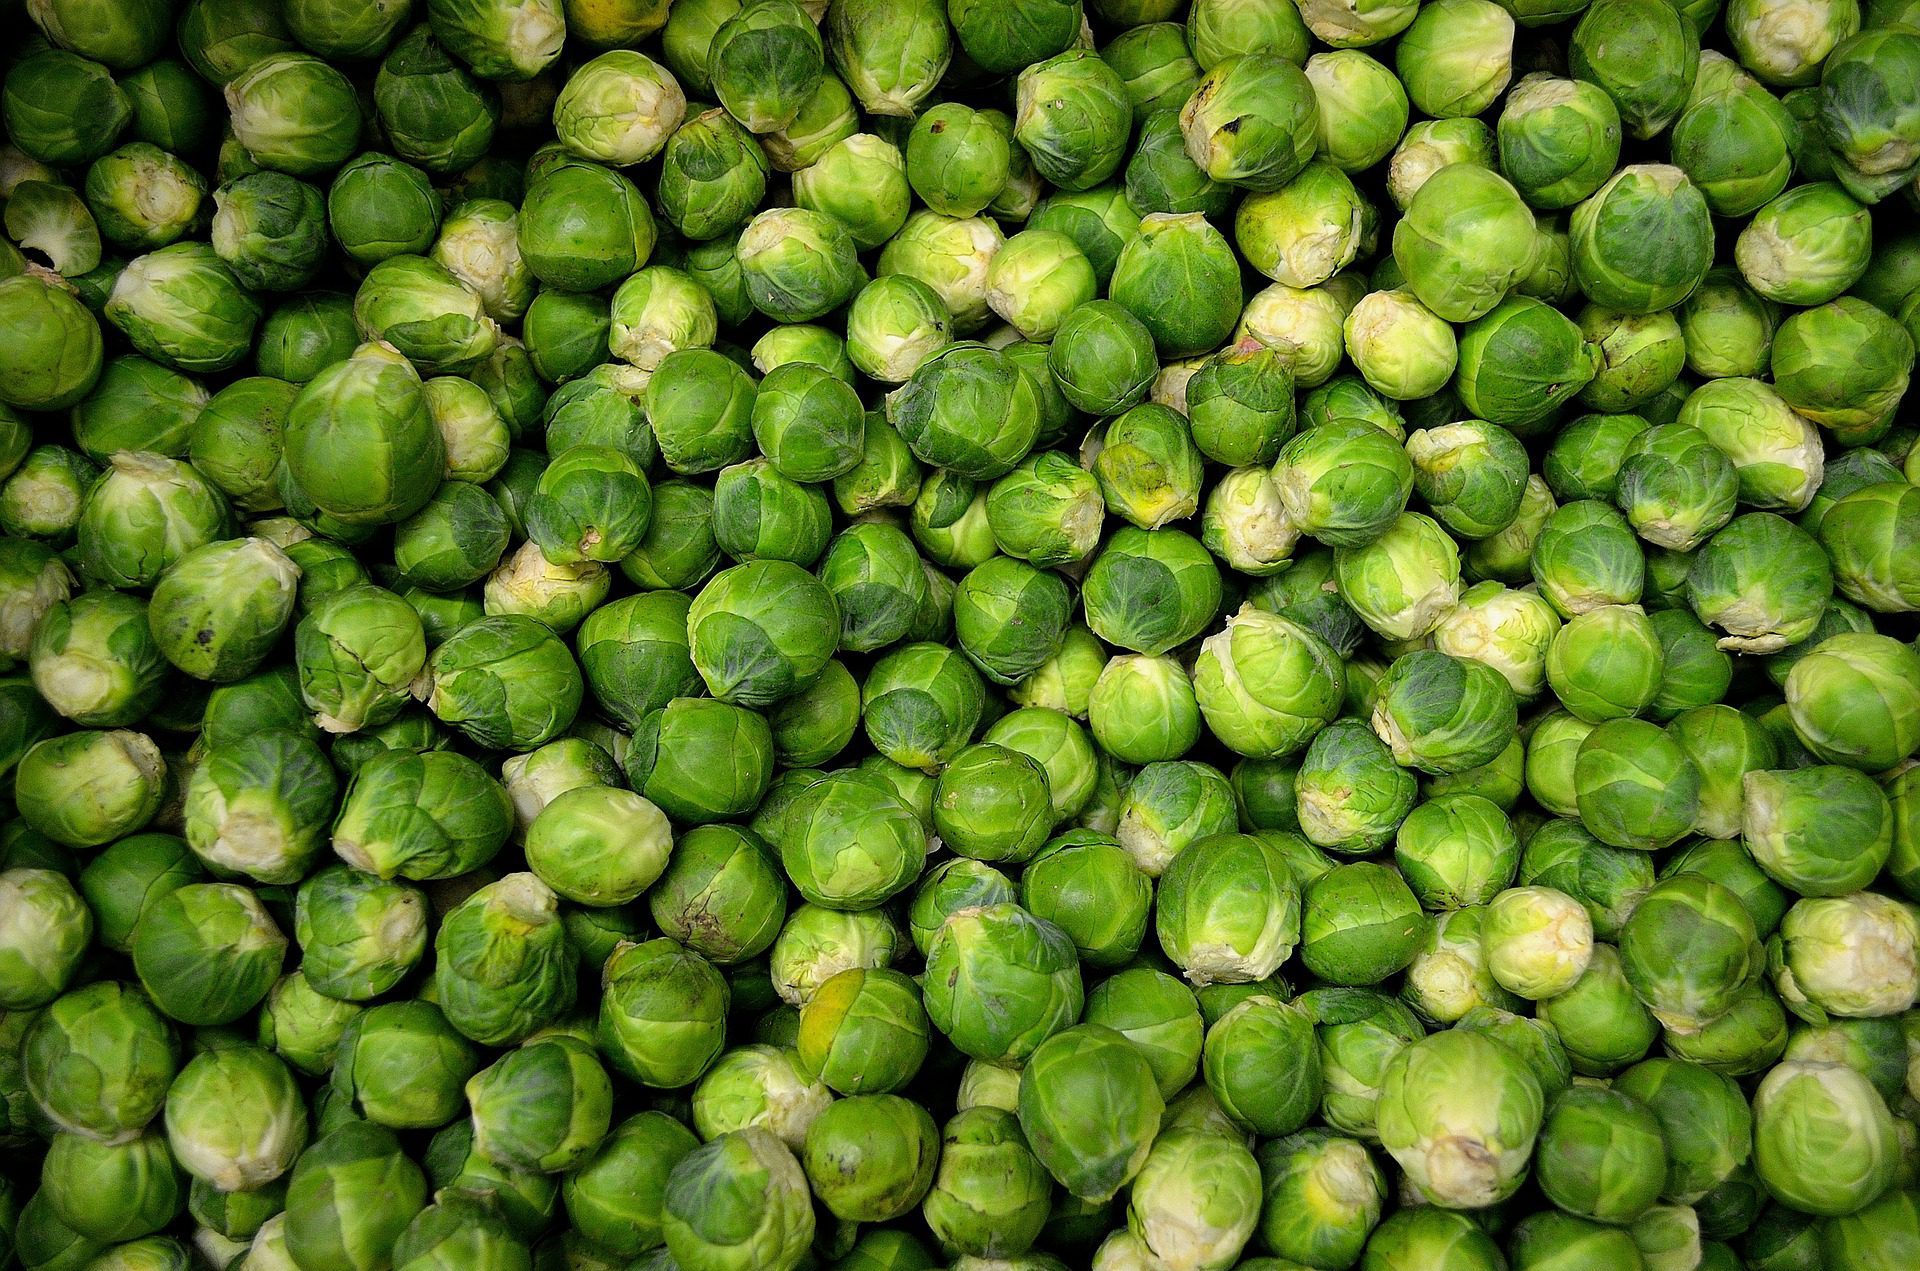 A few soggy sprouts leftover this Christmas? Your food caddy will love them!